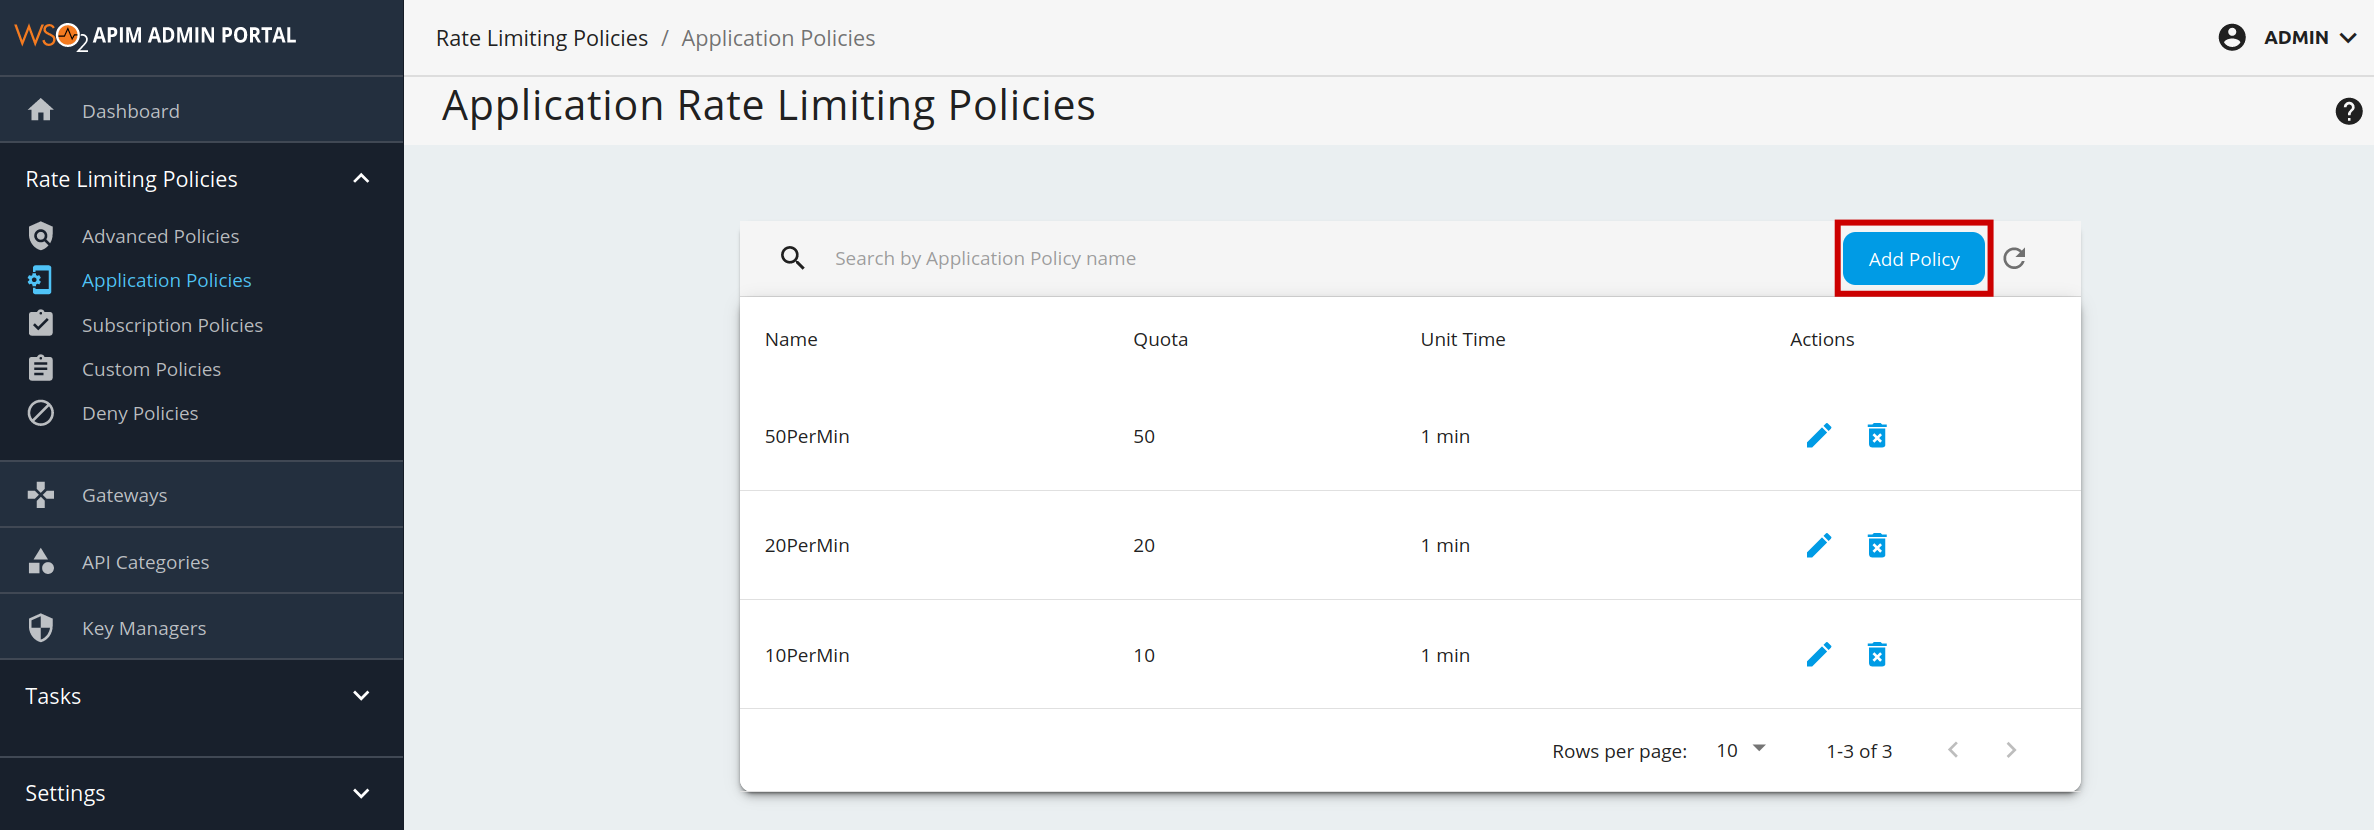 Add application policy page